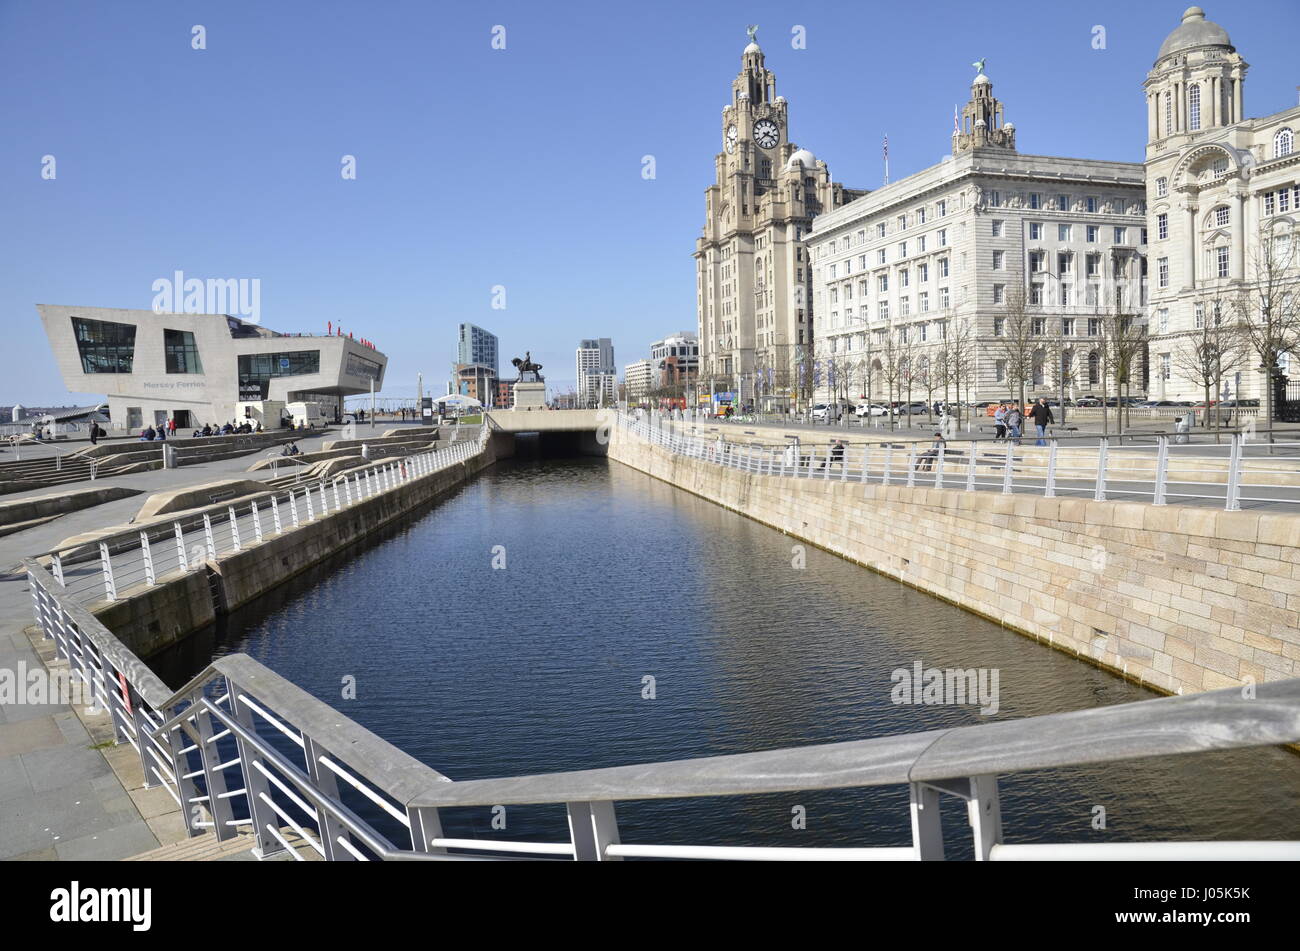 The Mersey Ferries building on Pier Head area on the River Mersey in Liverpool. The Liver, Cunard and Port of Liverpool buildings are to the right Stock Photo